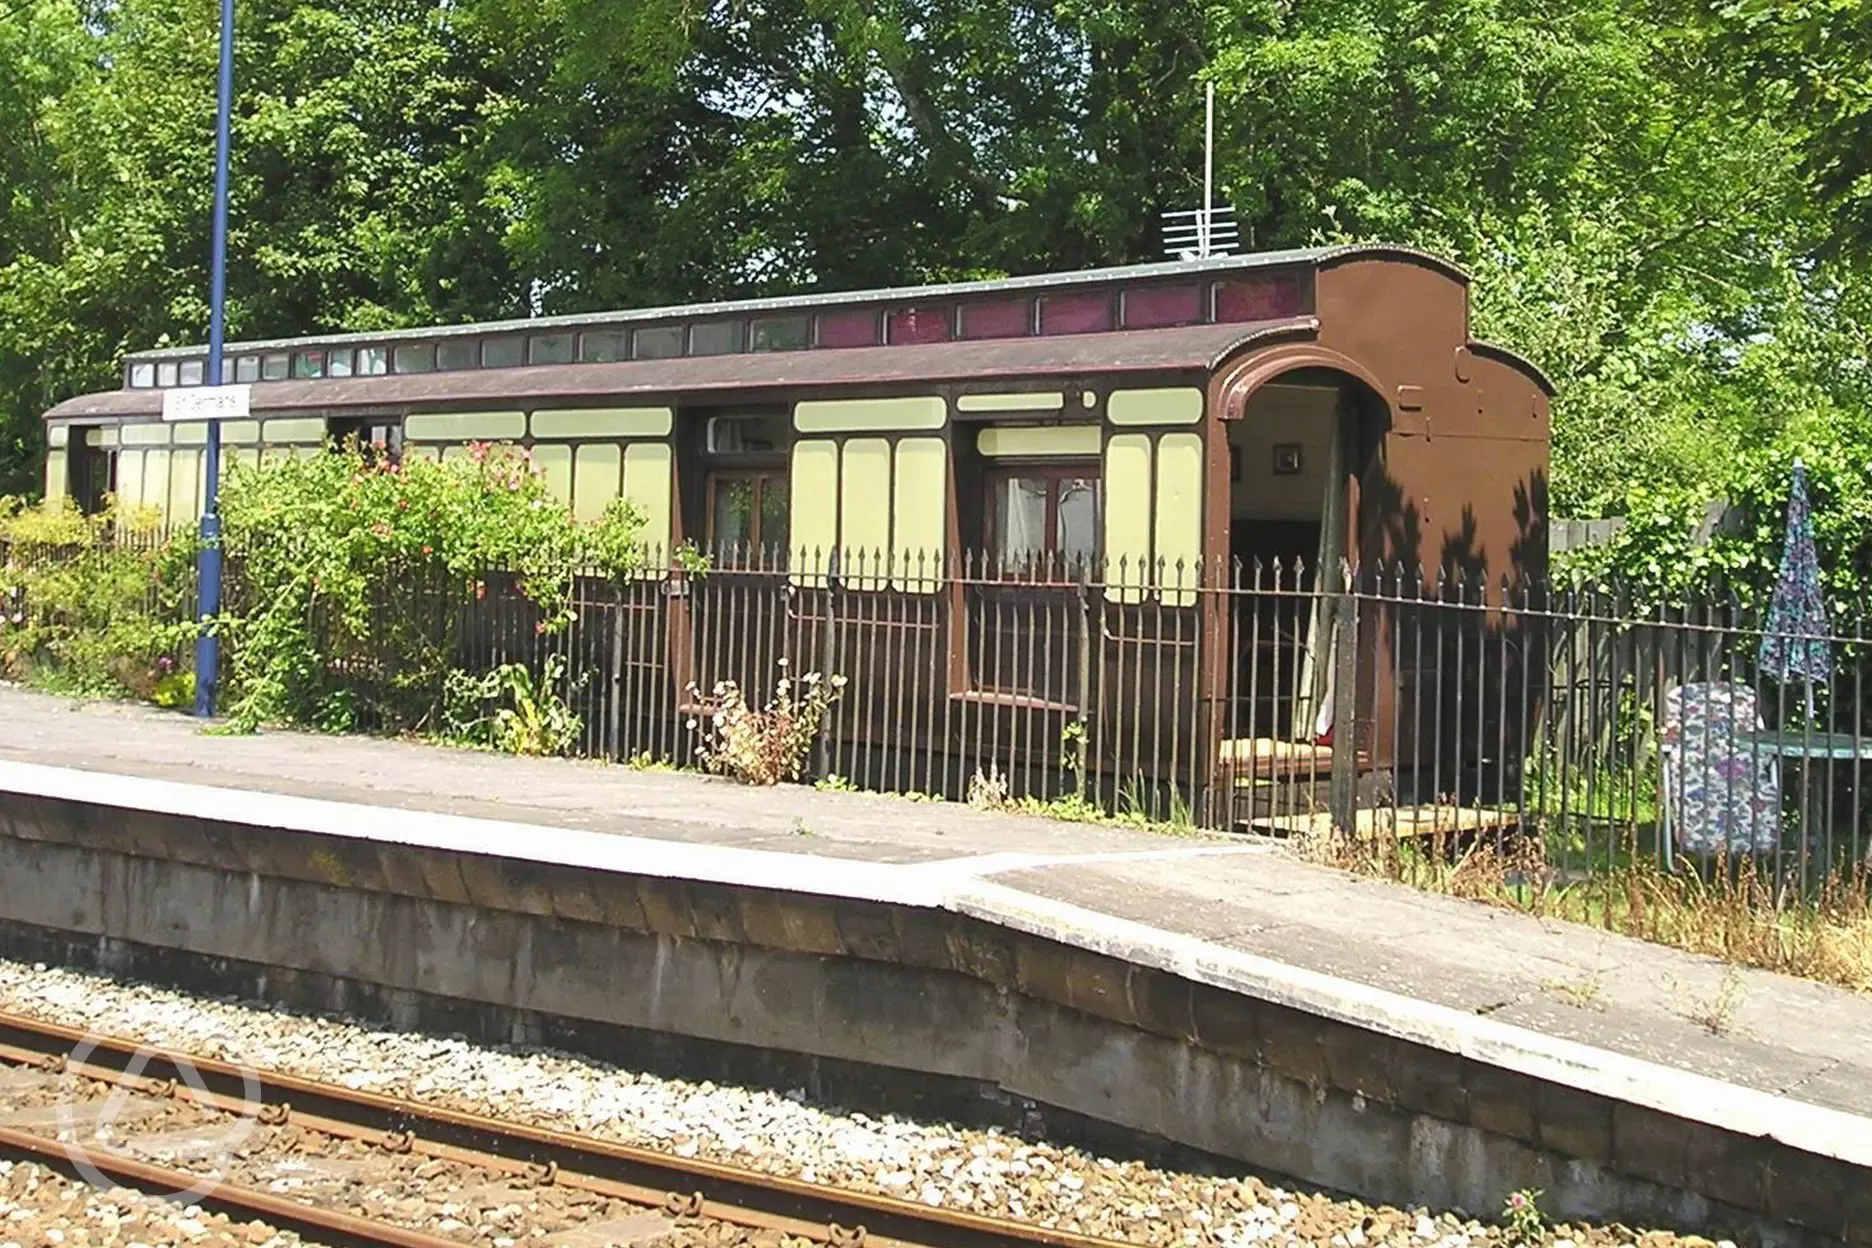 Travelling post office at Railholiday